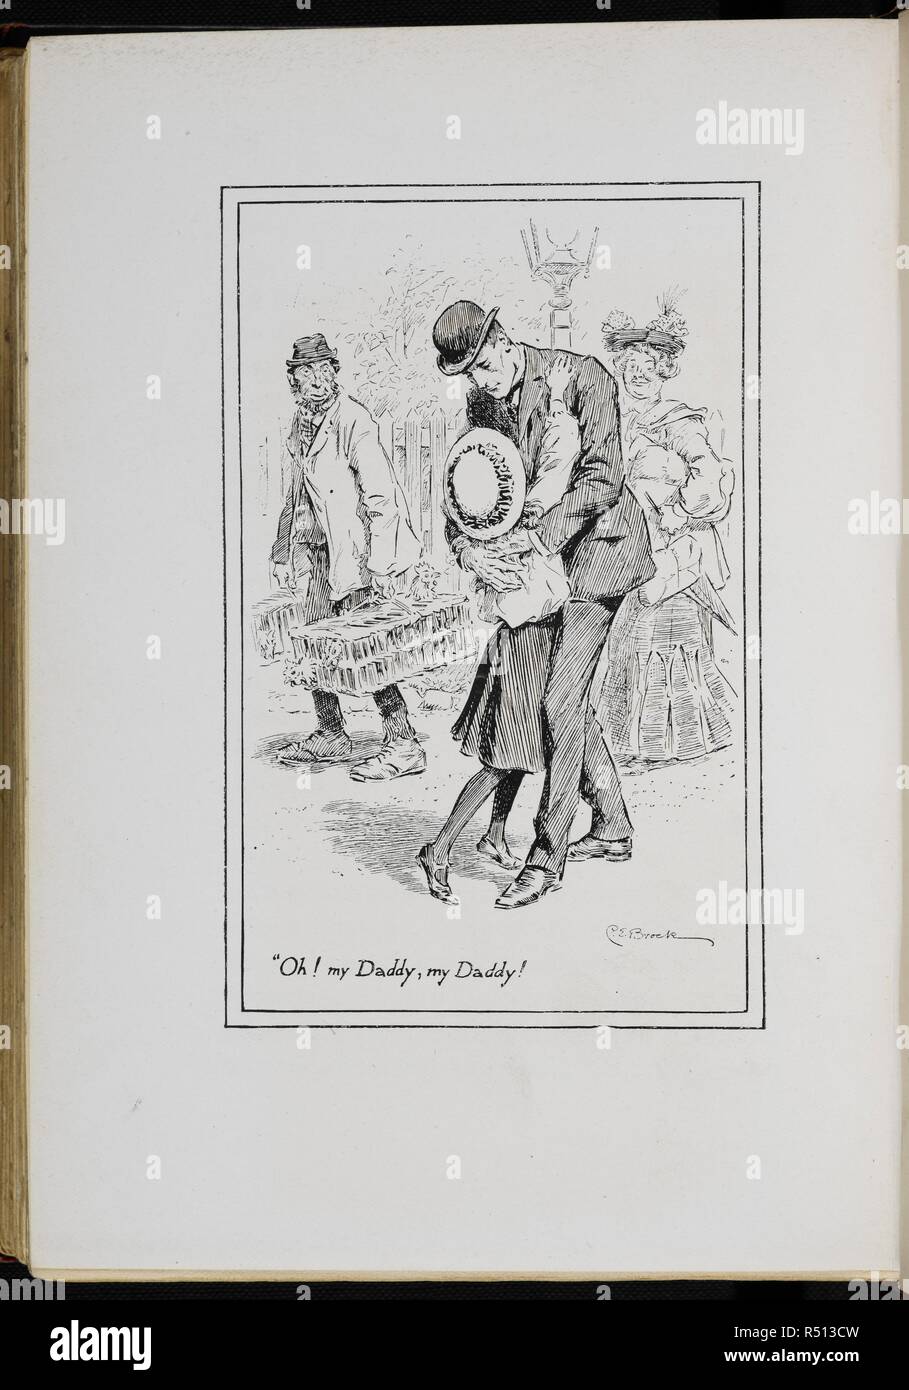 'Oh my Daddy, my Dady!'. The Railway Children With drawings by C E Brock. London : Wells Gardner & Co., 1906. Source: 12813.y.7 page 307. Language: English. Author: Brock, Charles Edmund. Nesbit, afterwards Bland, Edith. Stock Photo